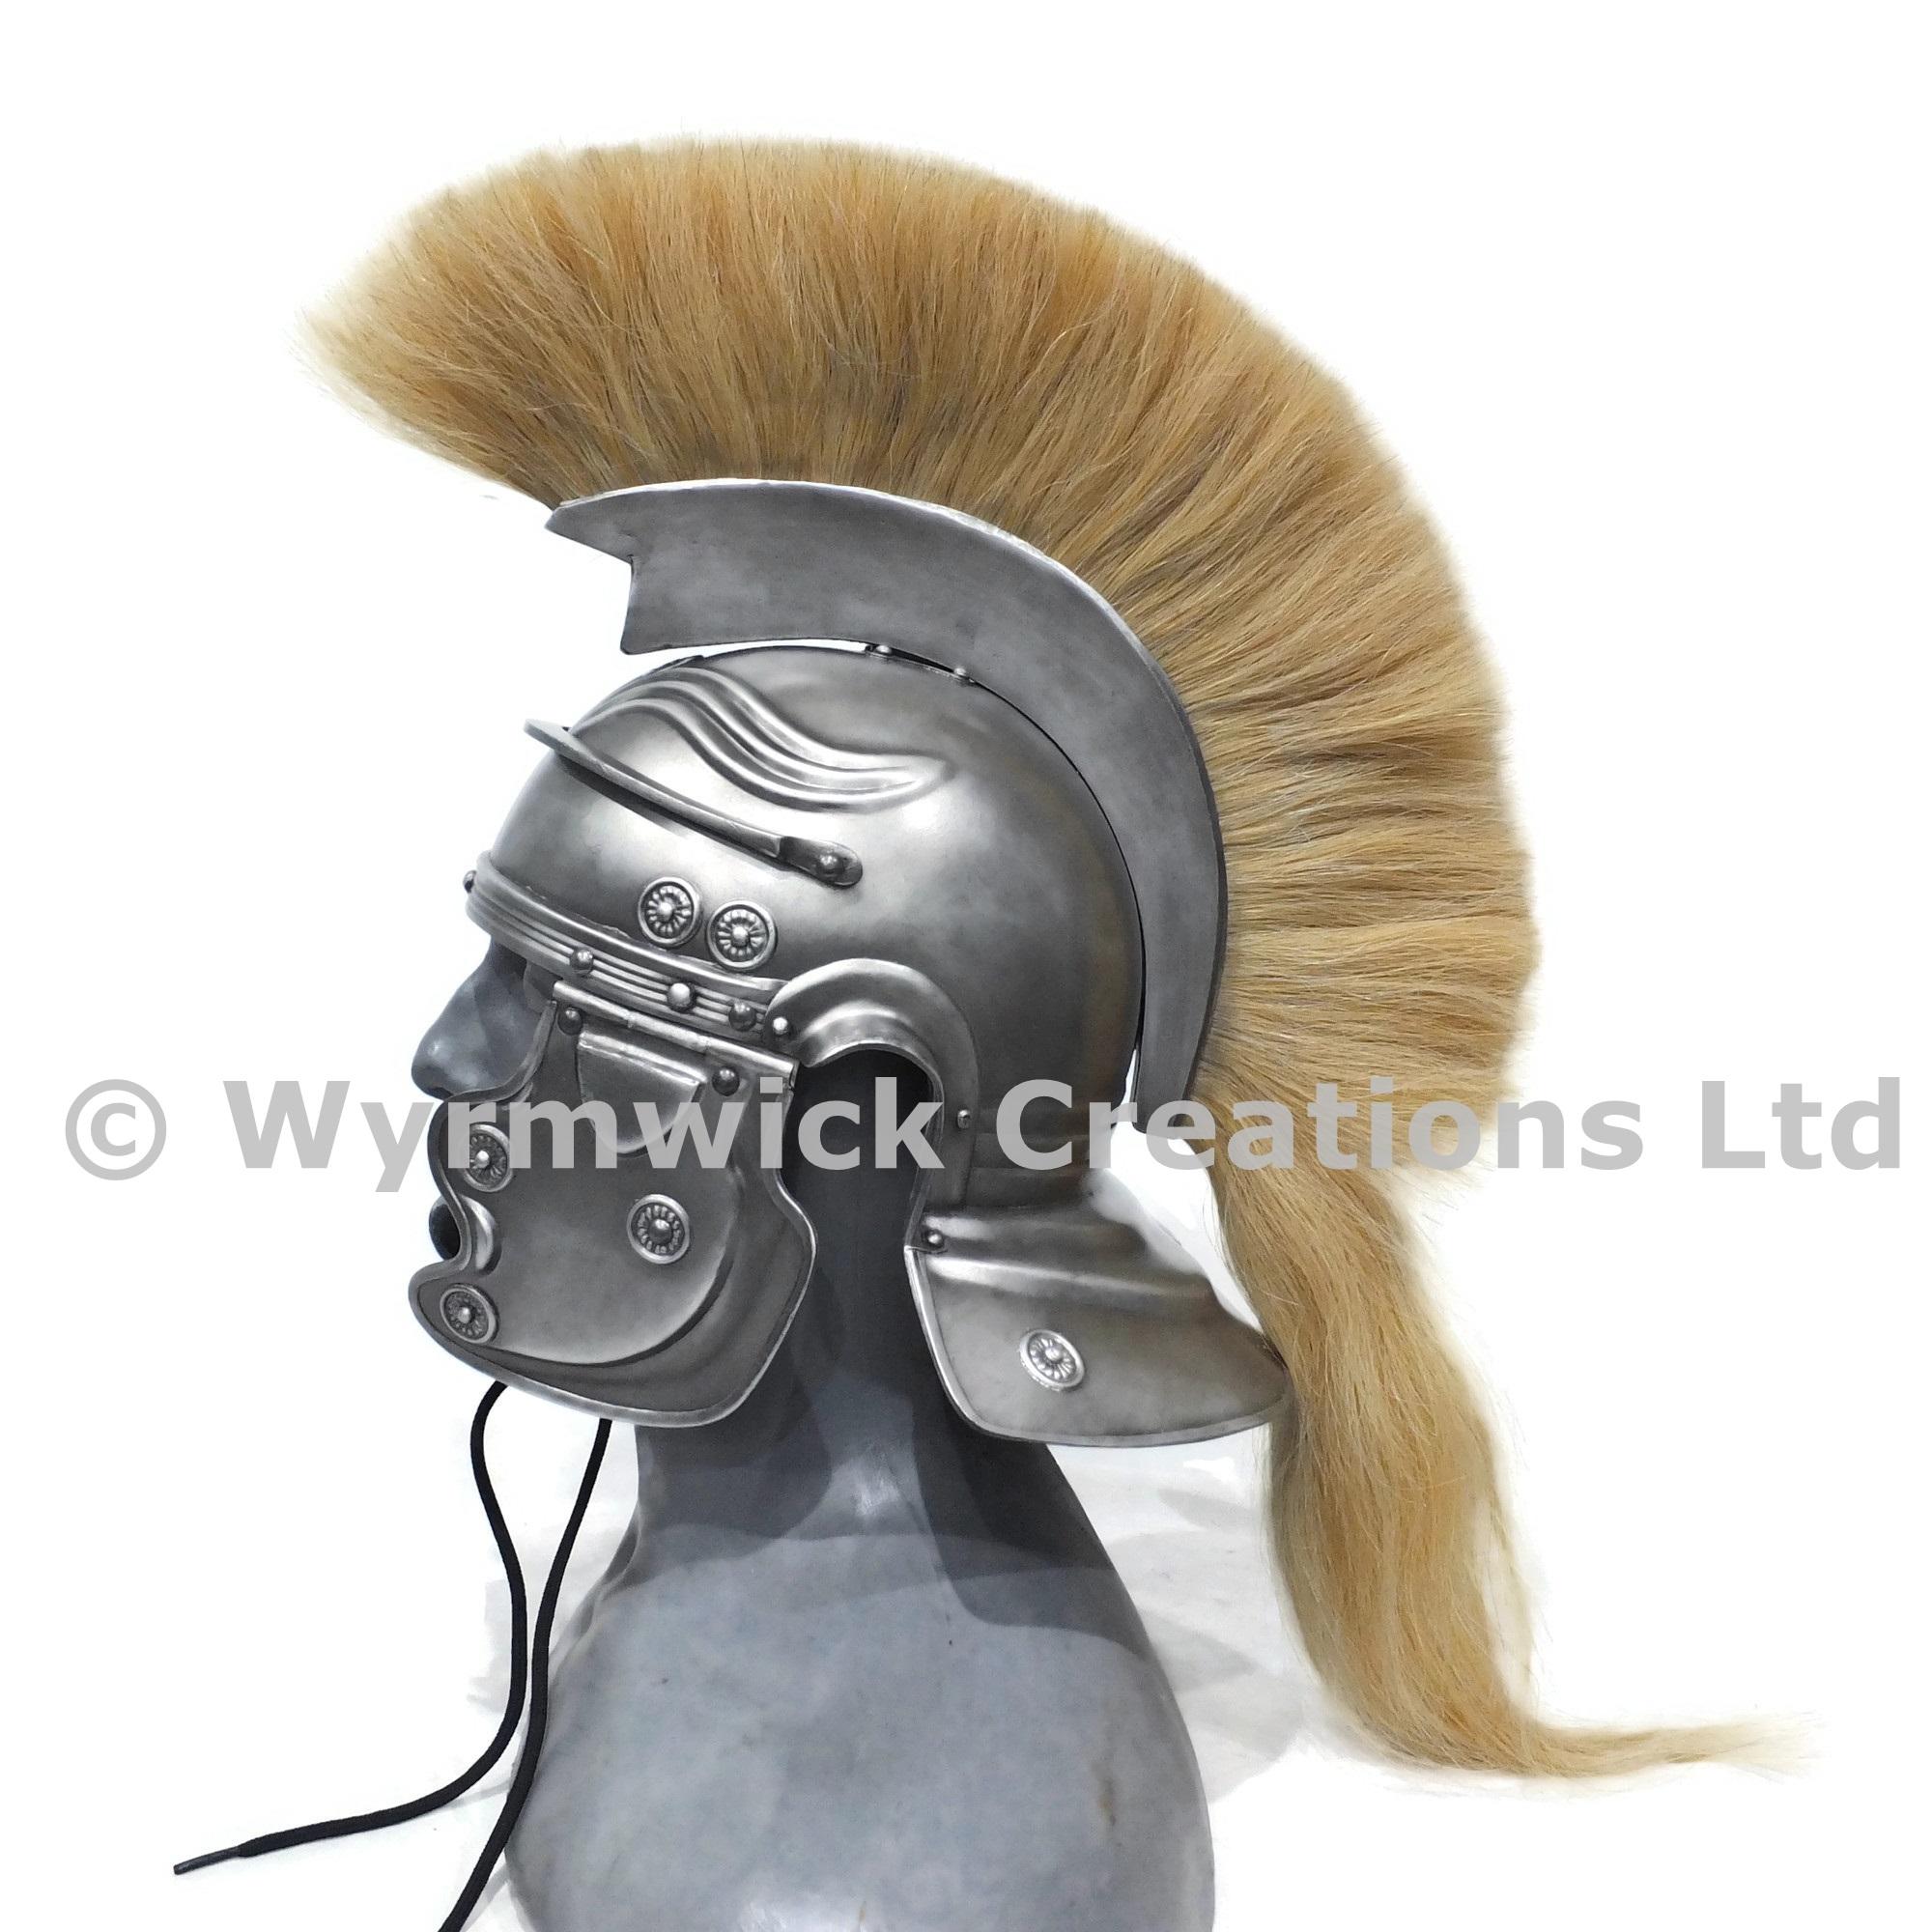 Custom plume fitted to our Roman helmet